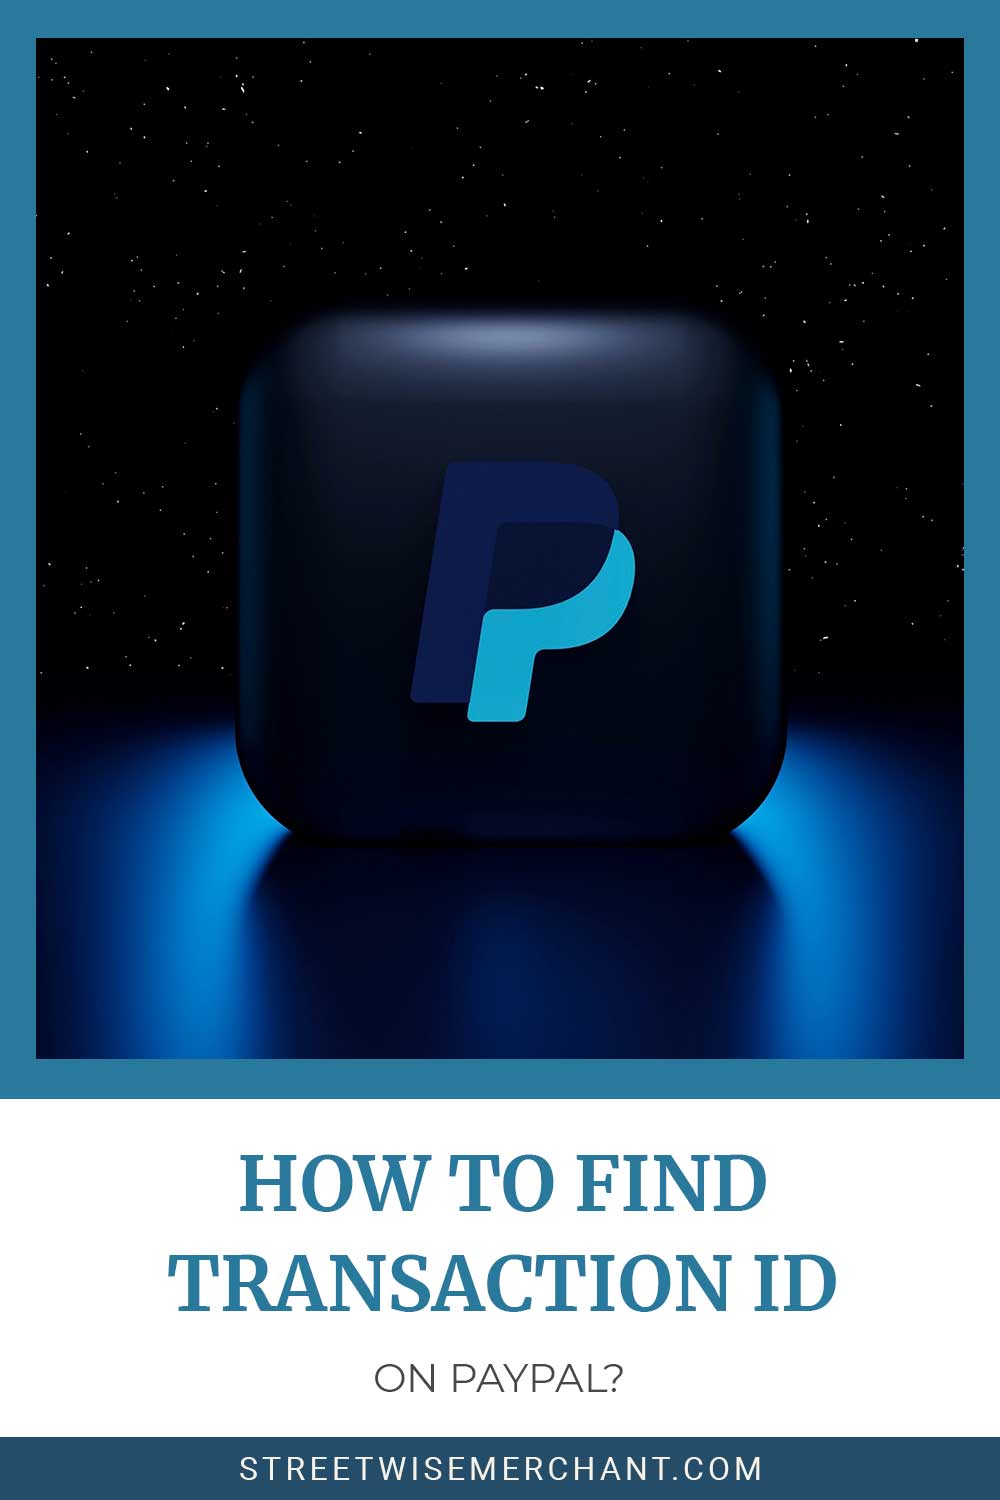 PayPal logo icon in 3D - How can you Find Transaction Id On Paypal?